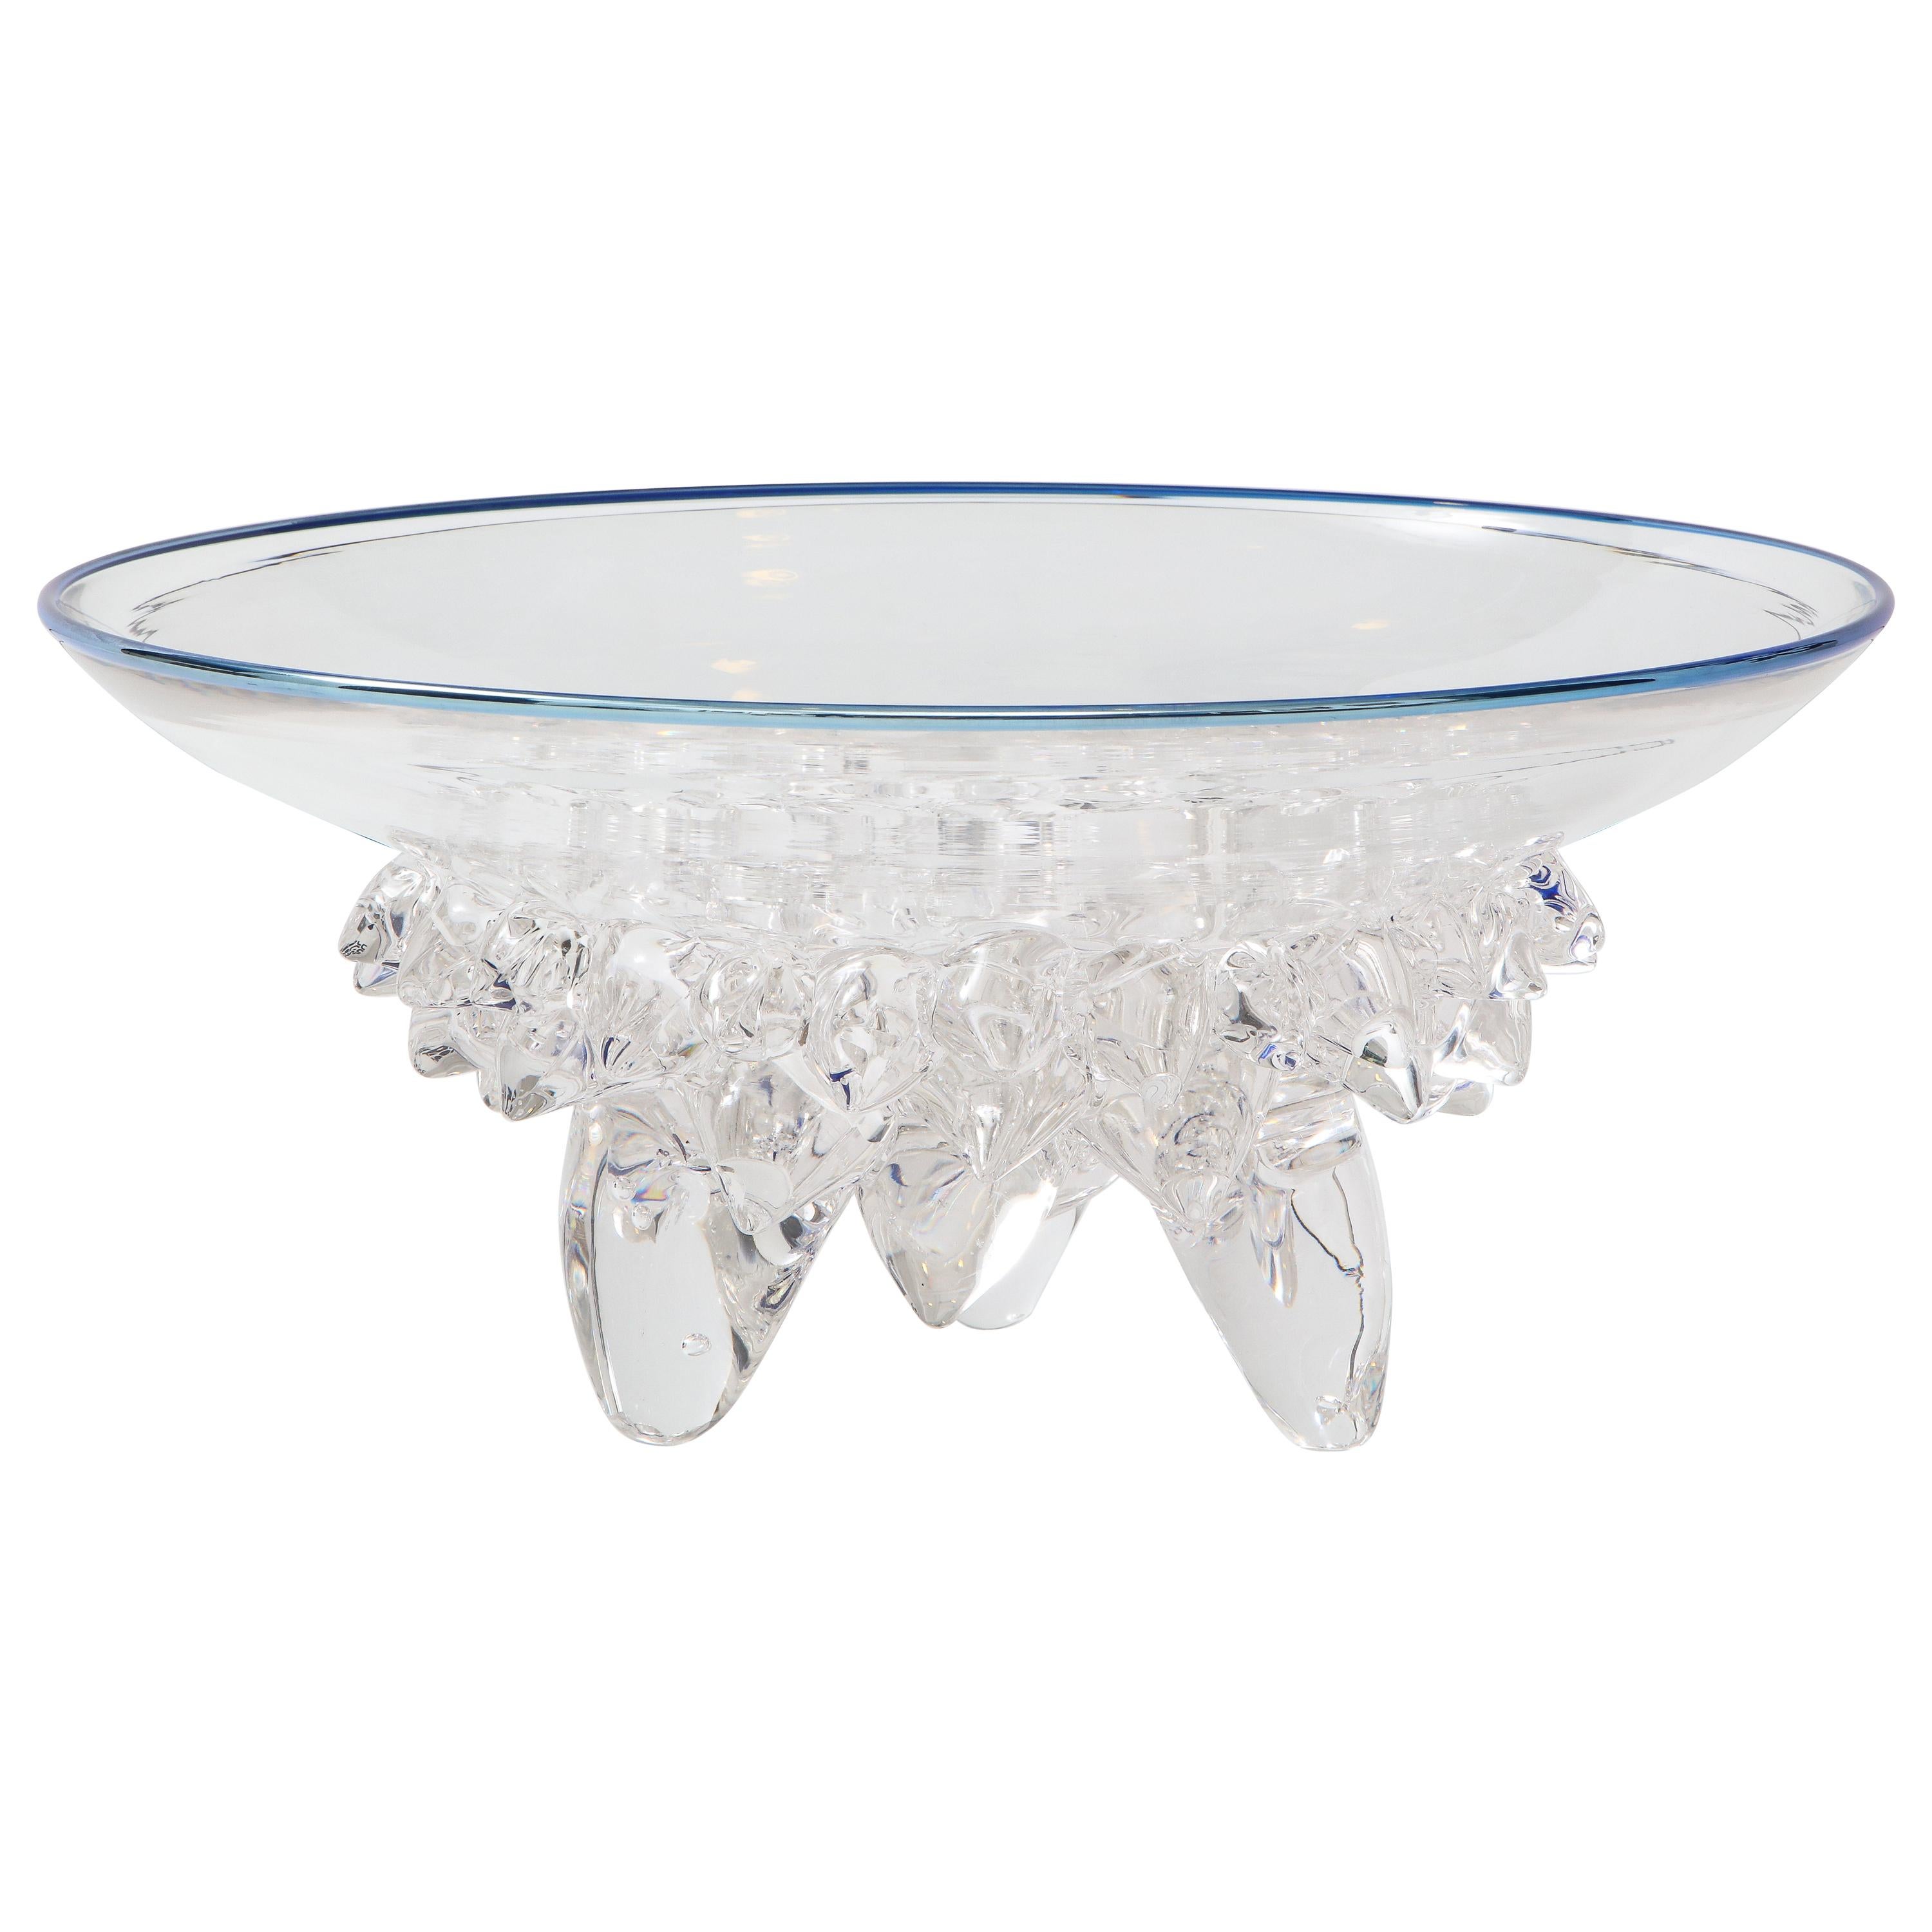 A. Madvin Extra Large Glass Centerpiece Bowl